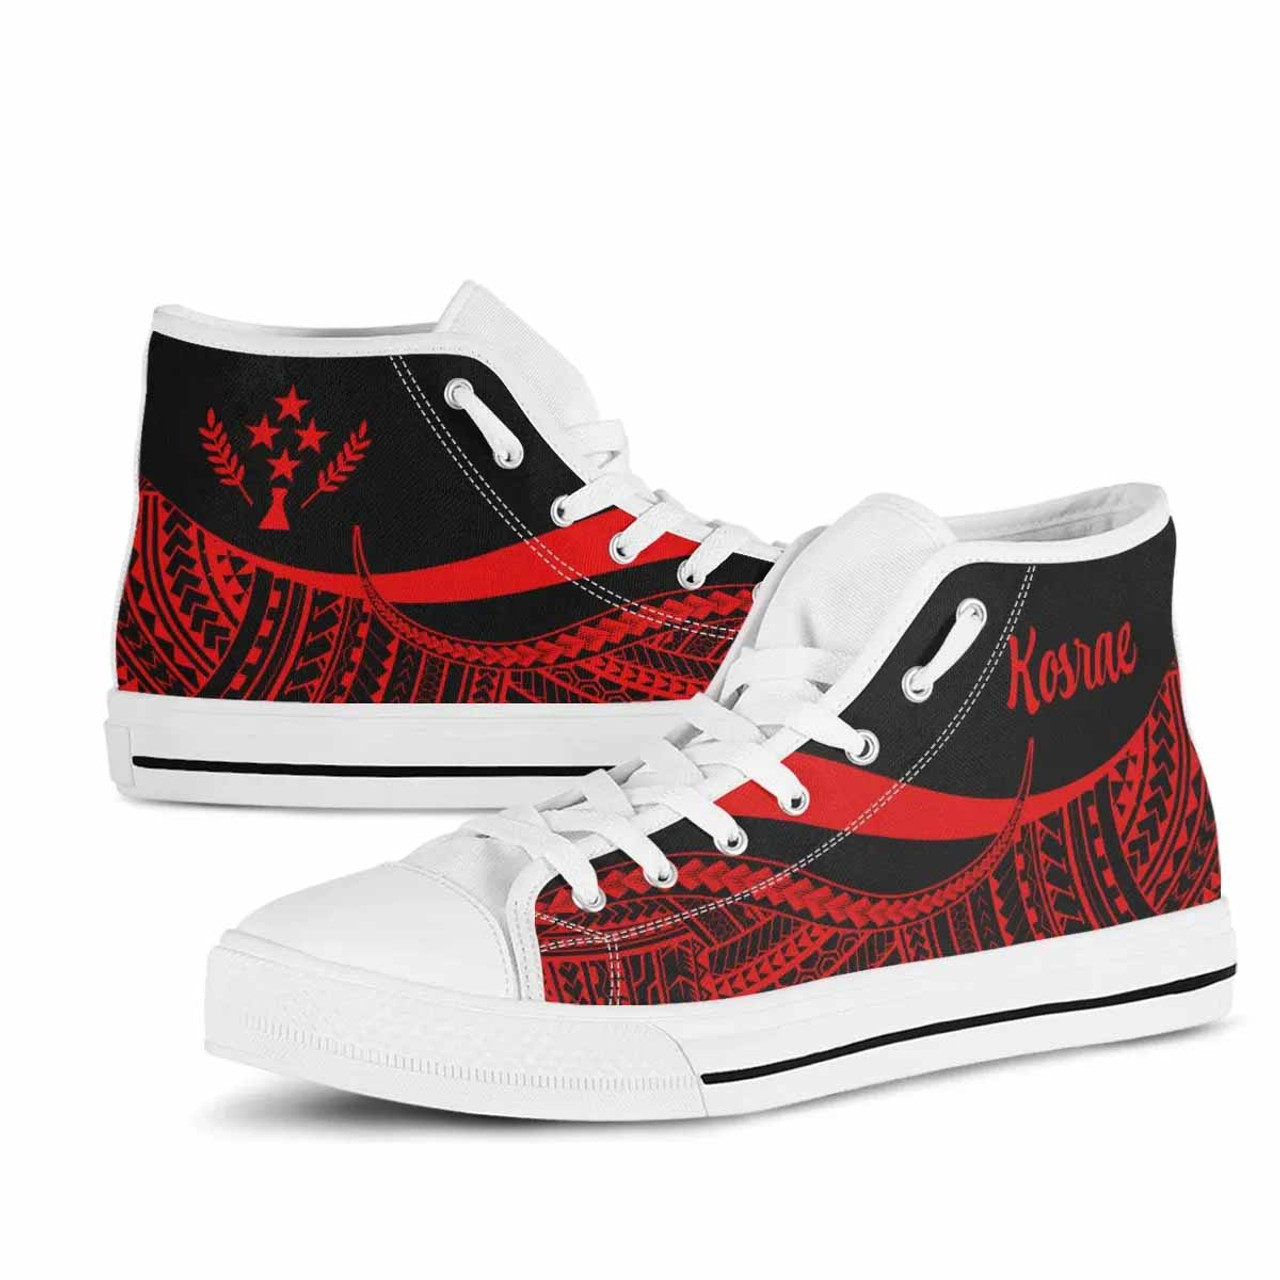 Kosrae High Top Shoes Red - Polynesian Tentacle Tribal Pattern 8